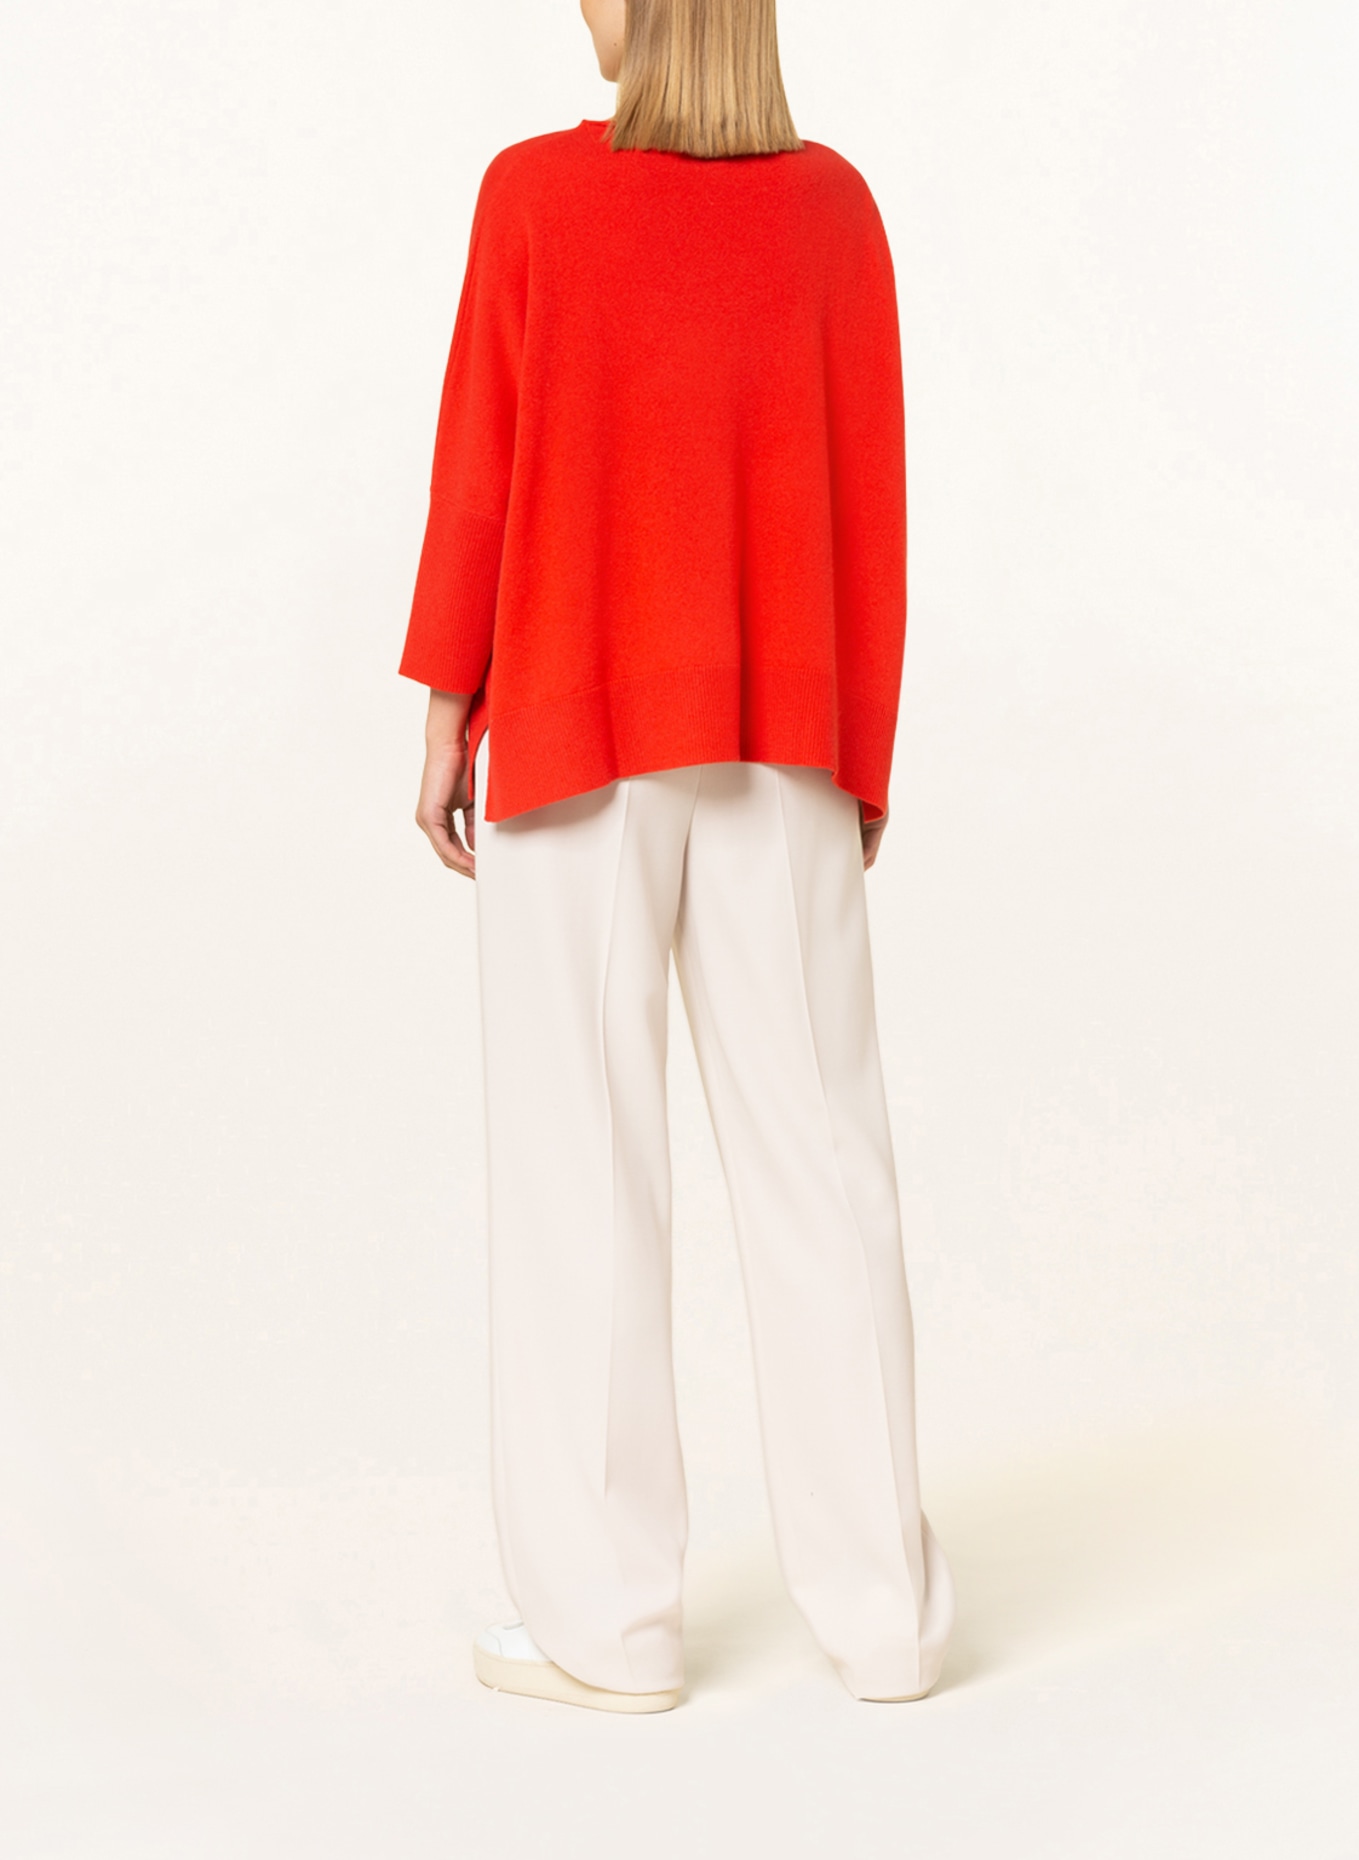 (THE MERCER) N.Y. Oversized sweater made of cashmere , Color: RED (Image 3)